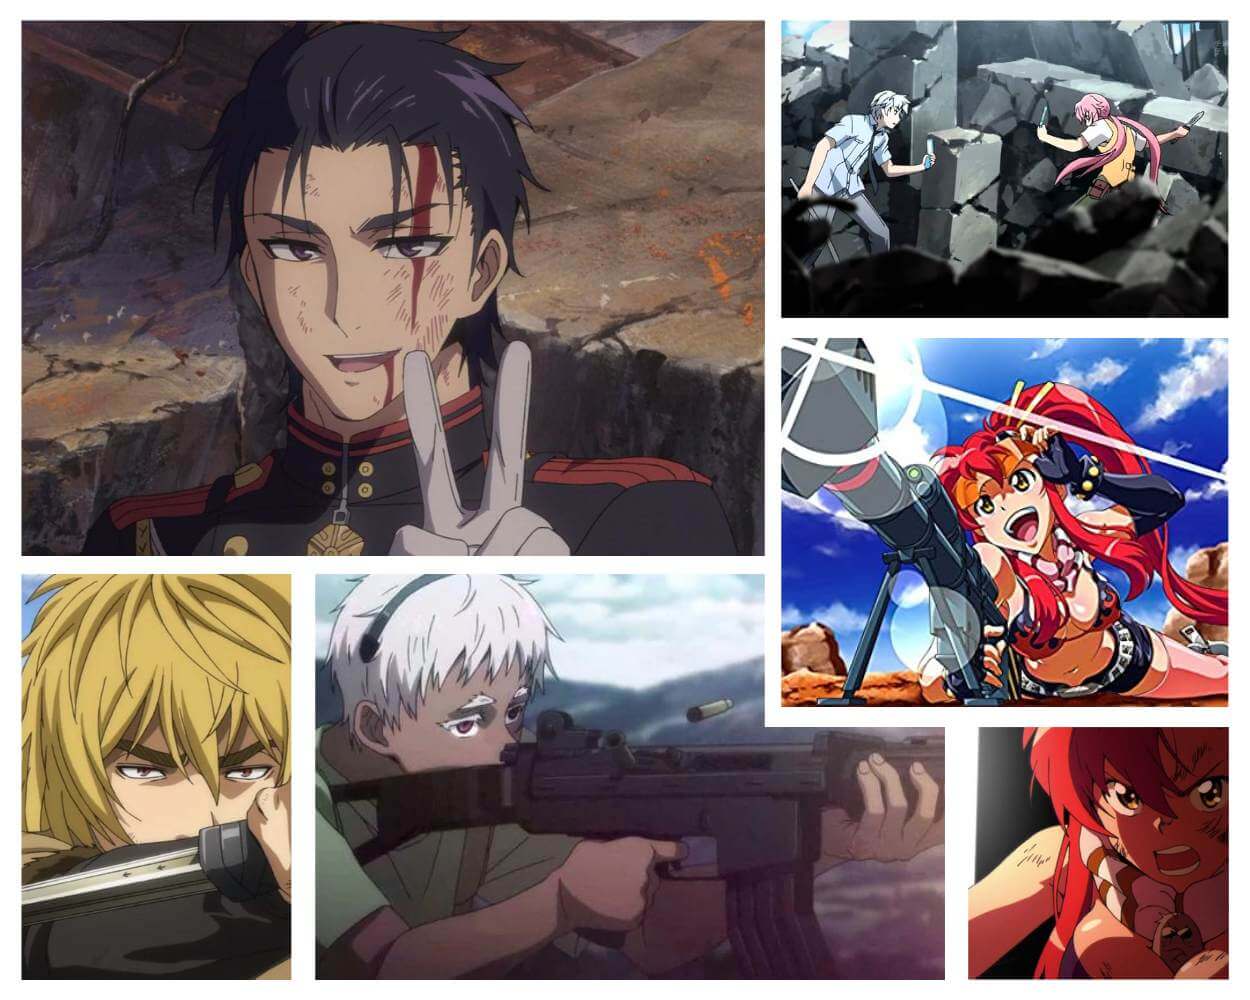 Soldier Characters in Anime